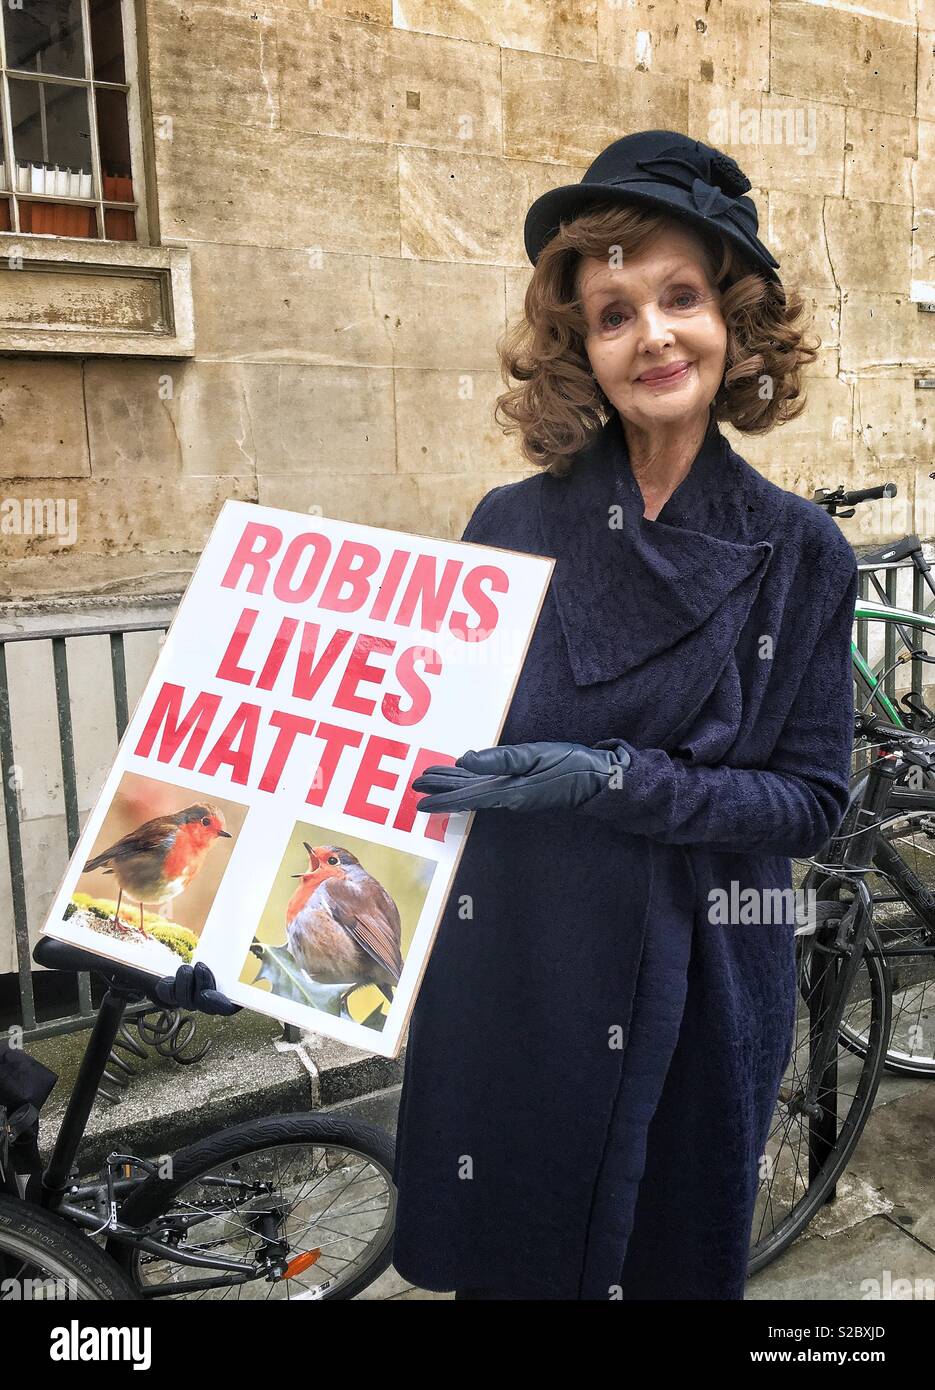 Lady campaigning about garden birds killed by cats Stock Photo